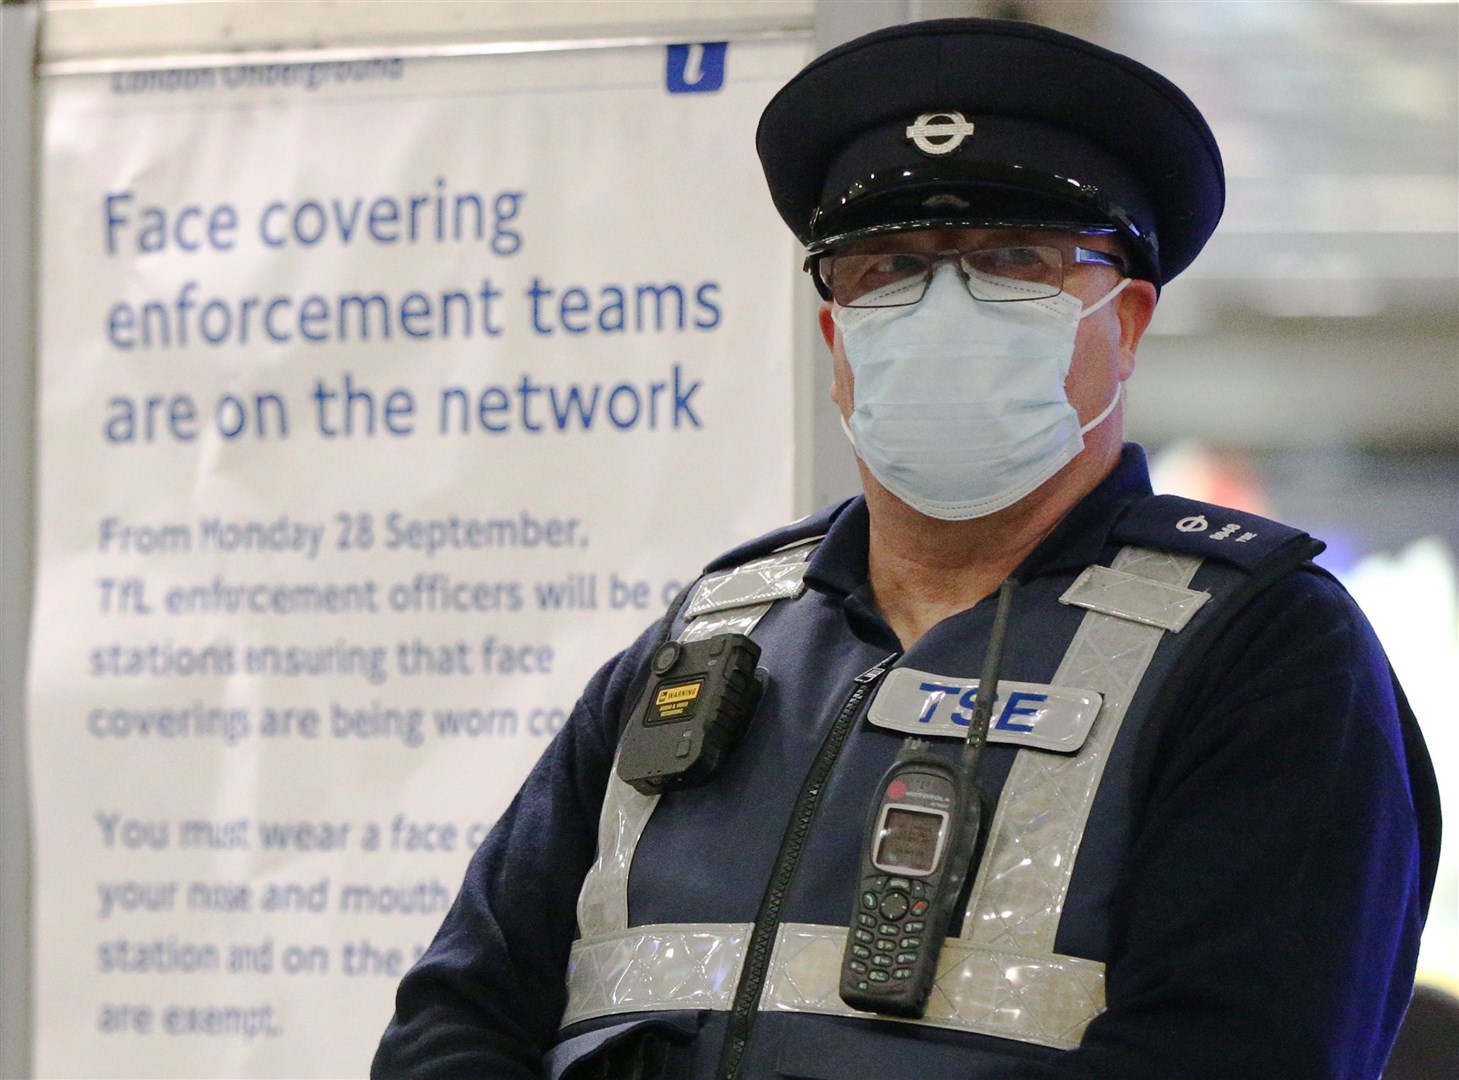 A TfL transport support and enforcement officer at King’s Cross underground station (Jonathan Brady/PA)